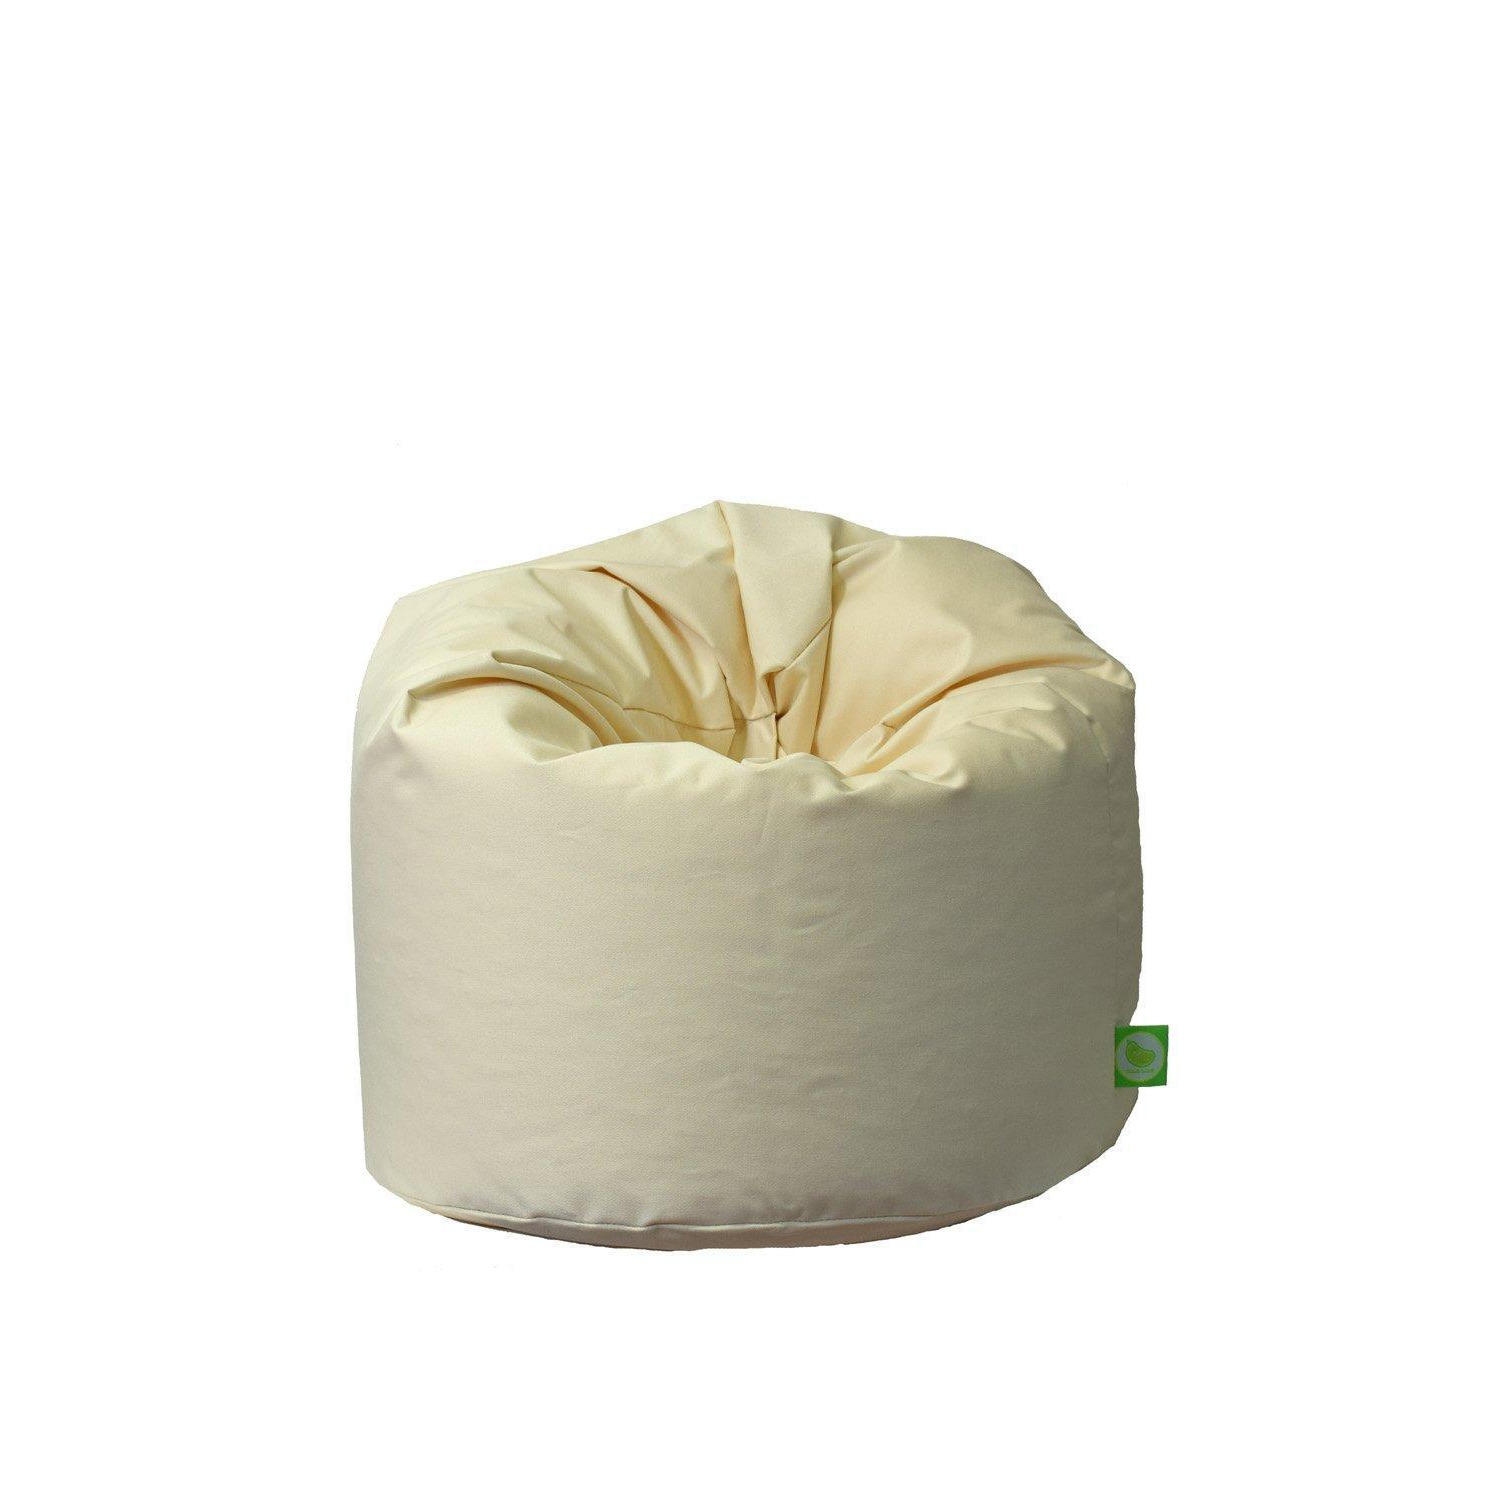 Cotton Twill Natural Bean Bag Large Size - image 1